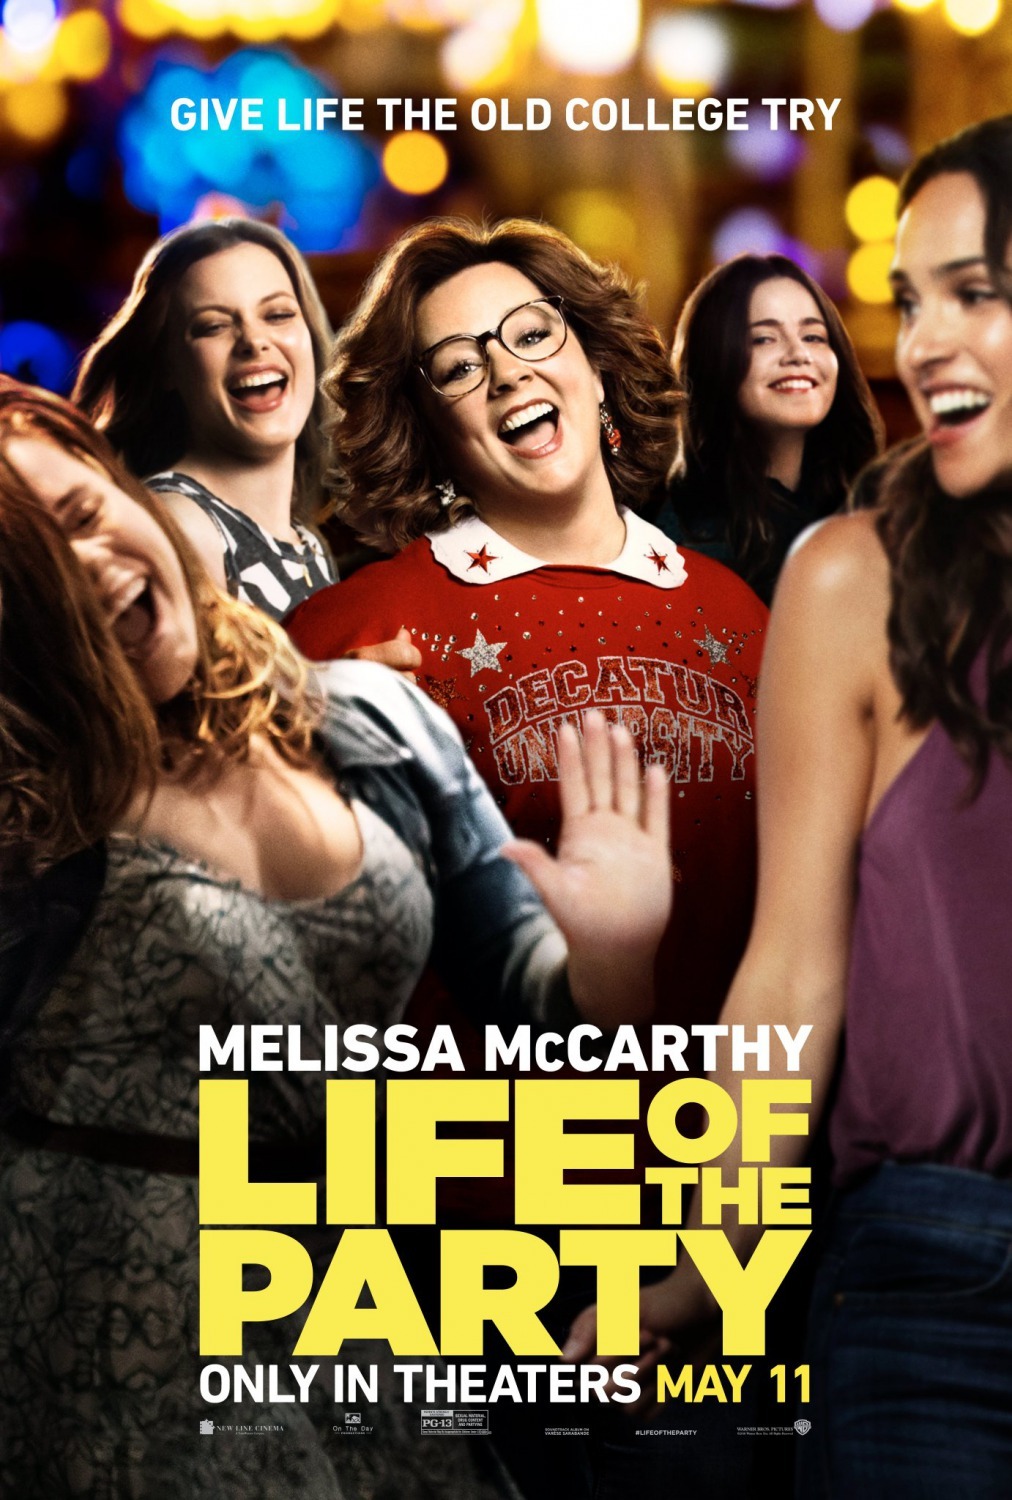 Life Of The Party (2018) Melissa McCarthy